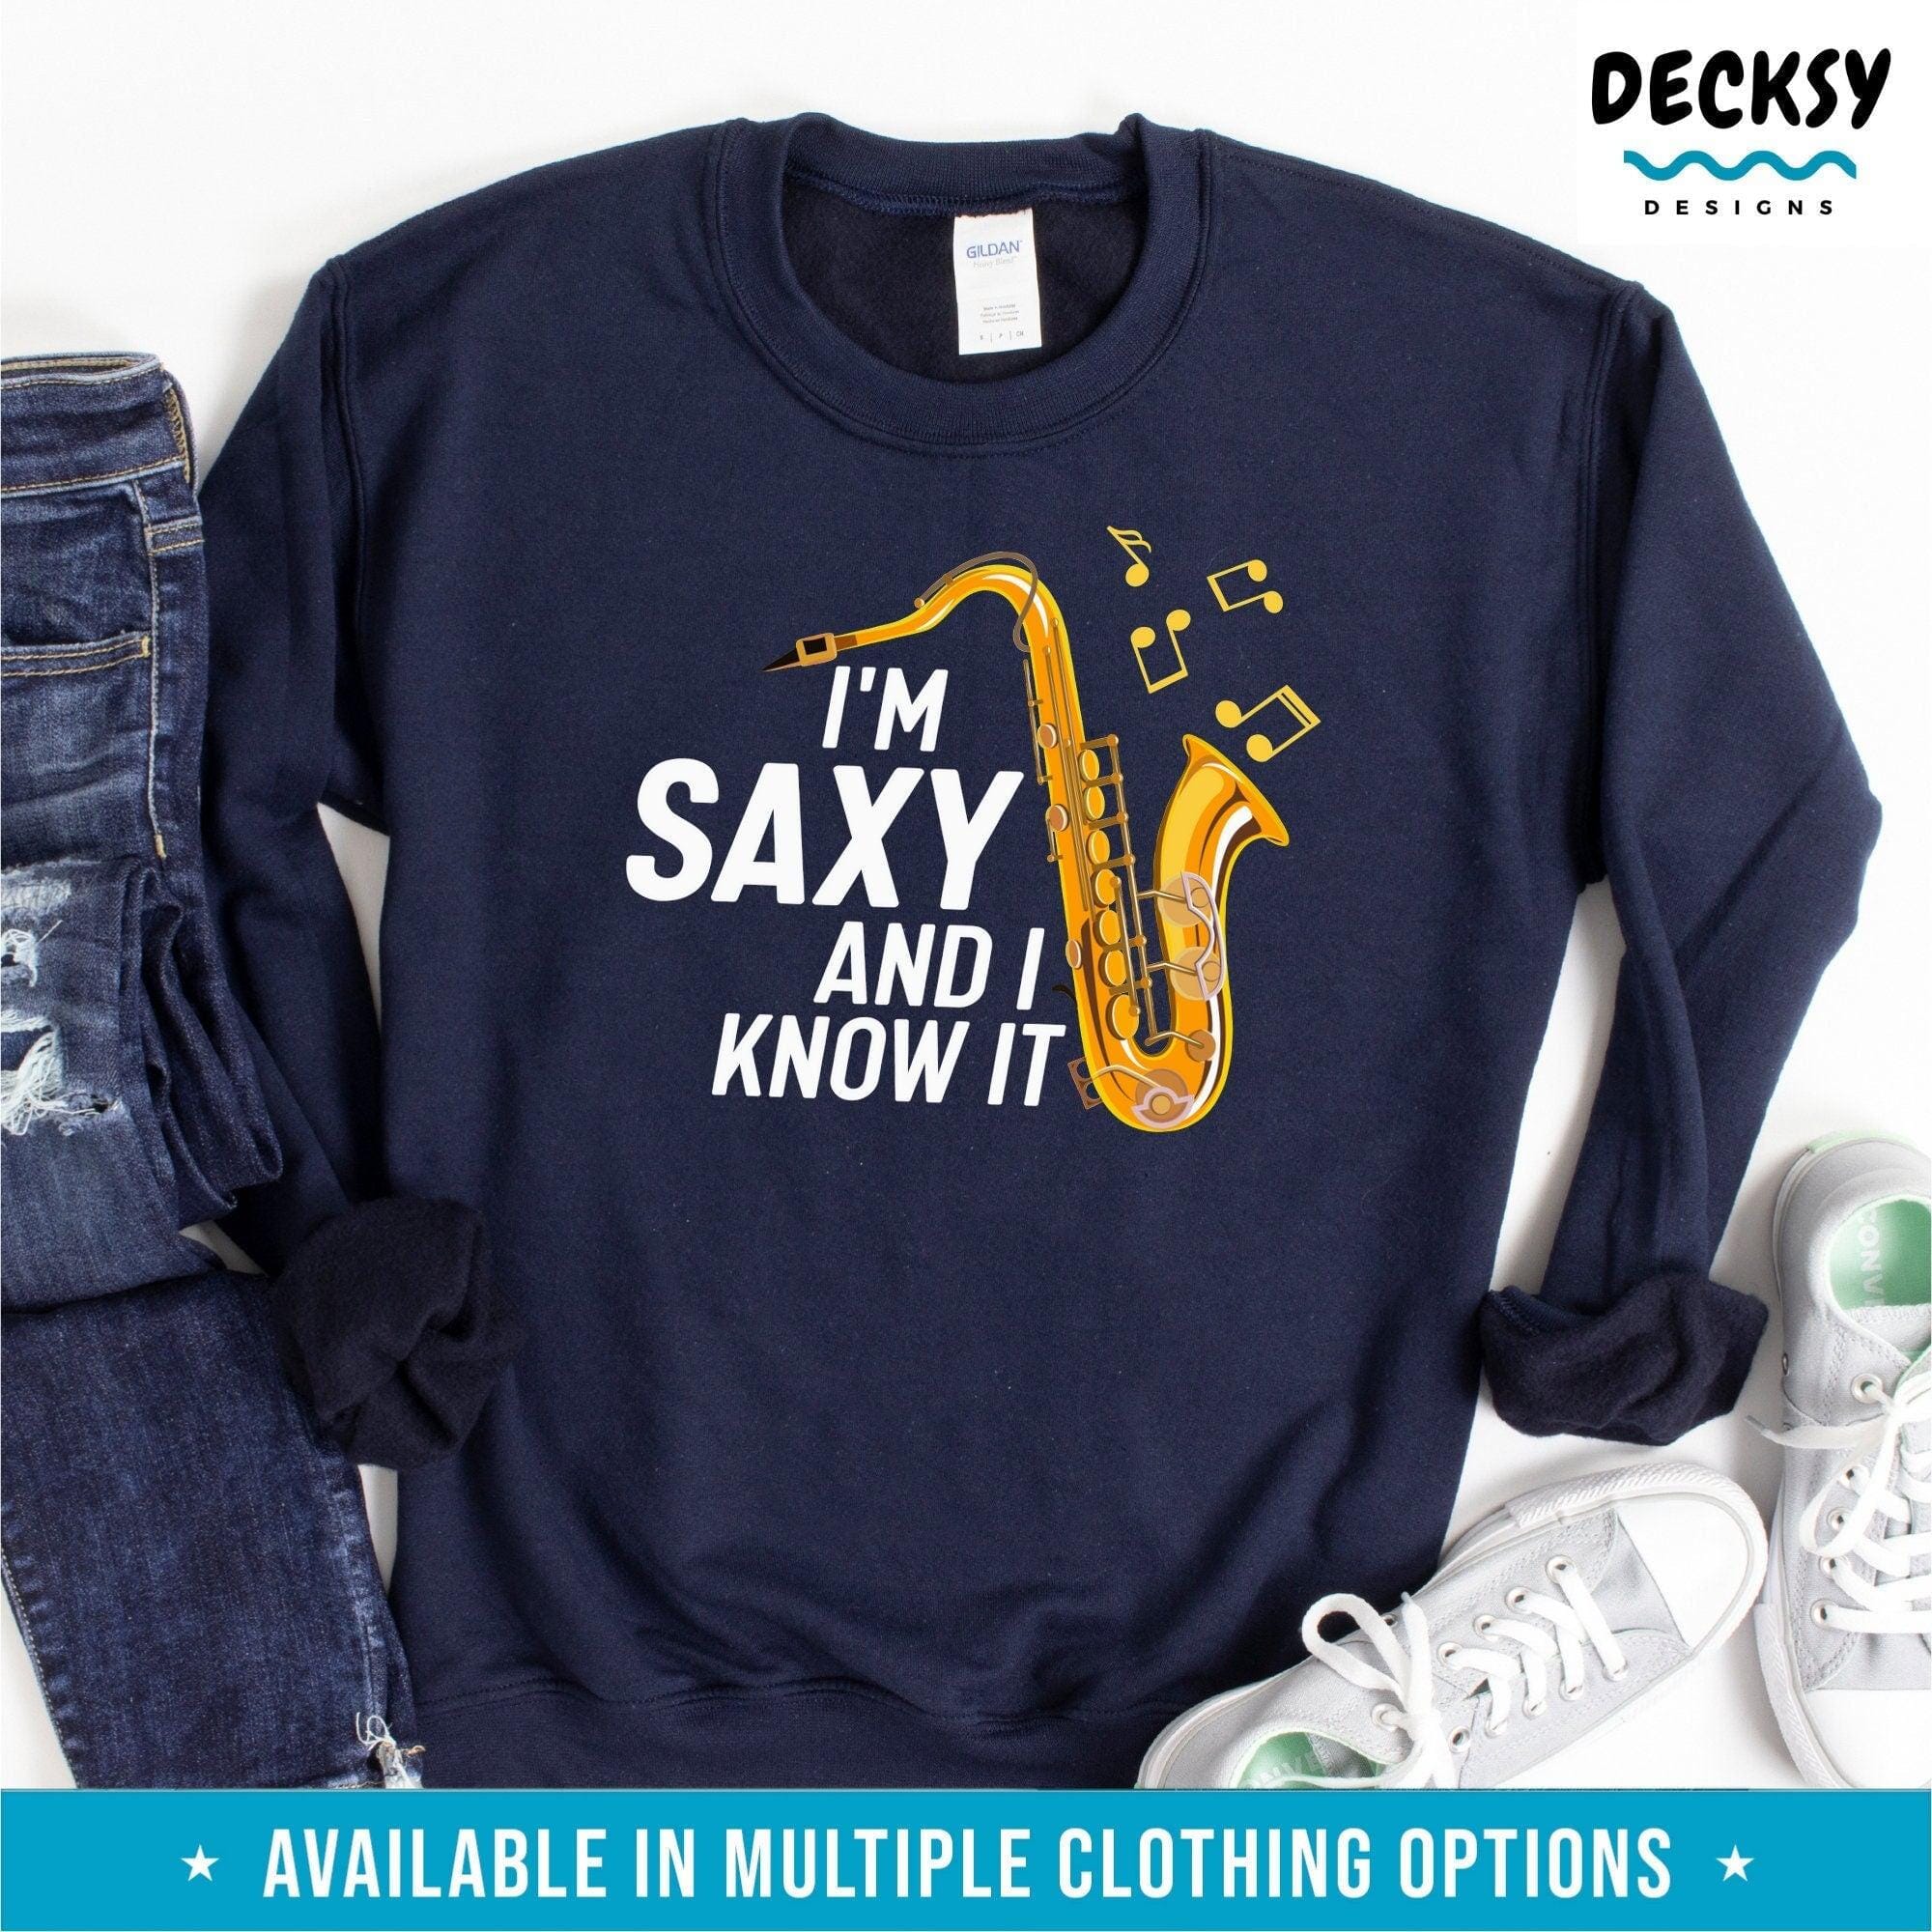 Saxophonist Shirt, Gift For Sax Player-Clothing:Gender-Neutral Adult Clothing:Tops & Tees:T-shirts:Graphic Tees-DecksyDesigns